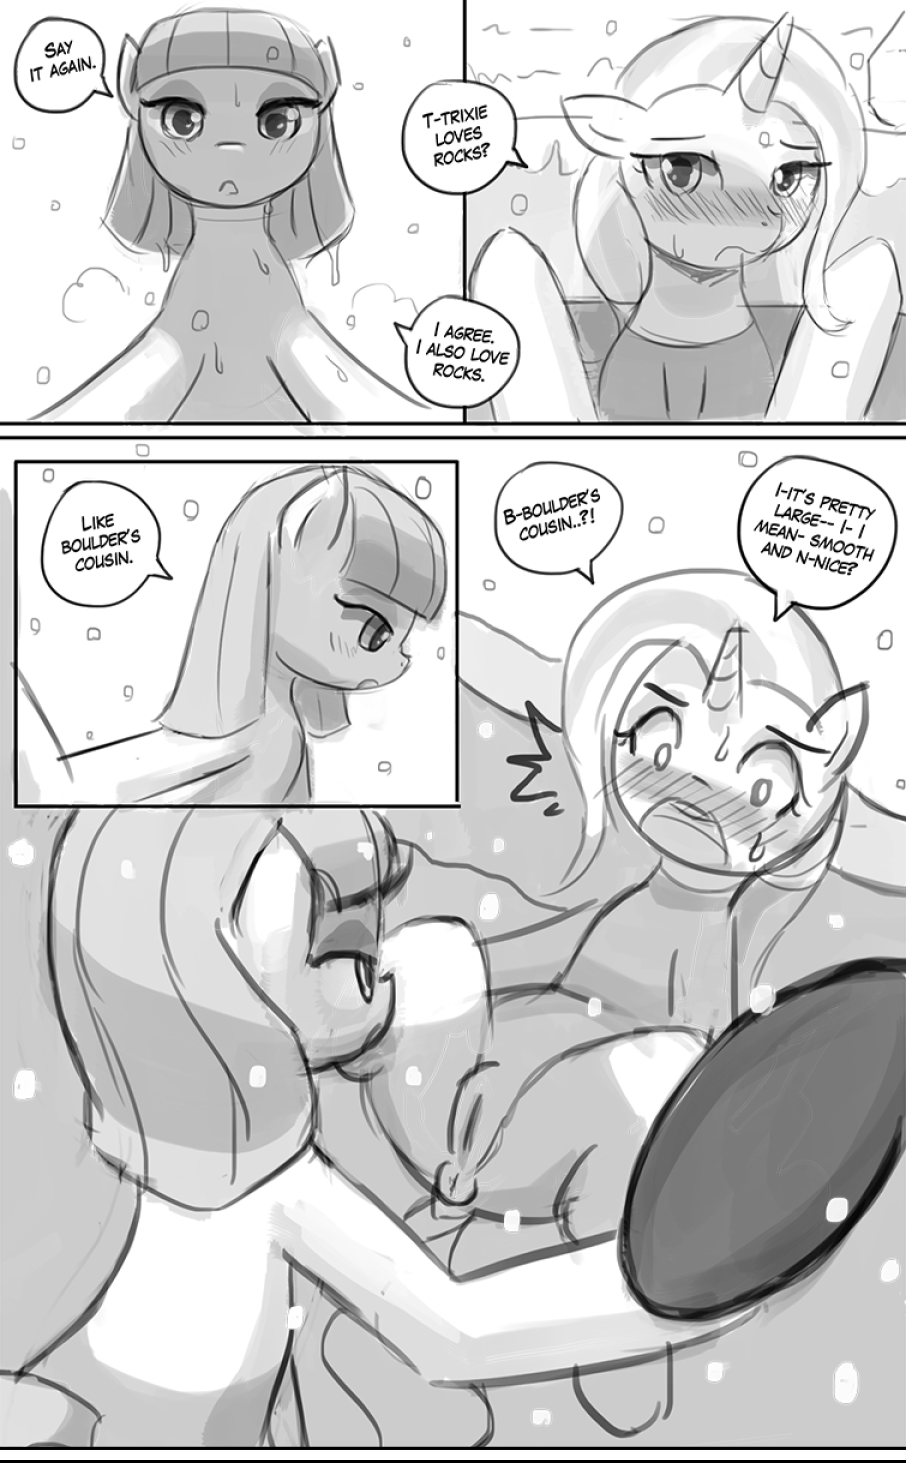 Homesick Part 2: Hearth's Warming Eve porn comic picture 12